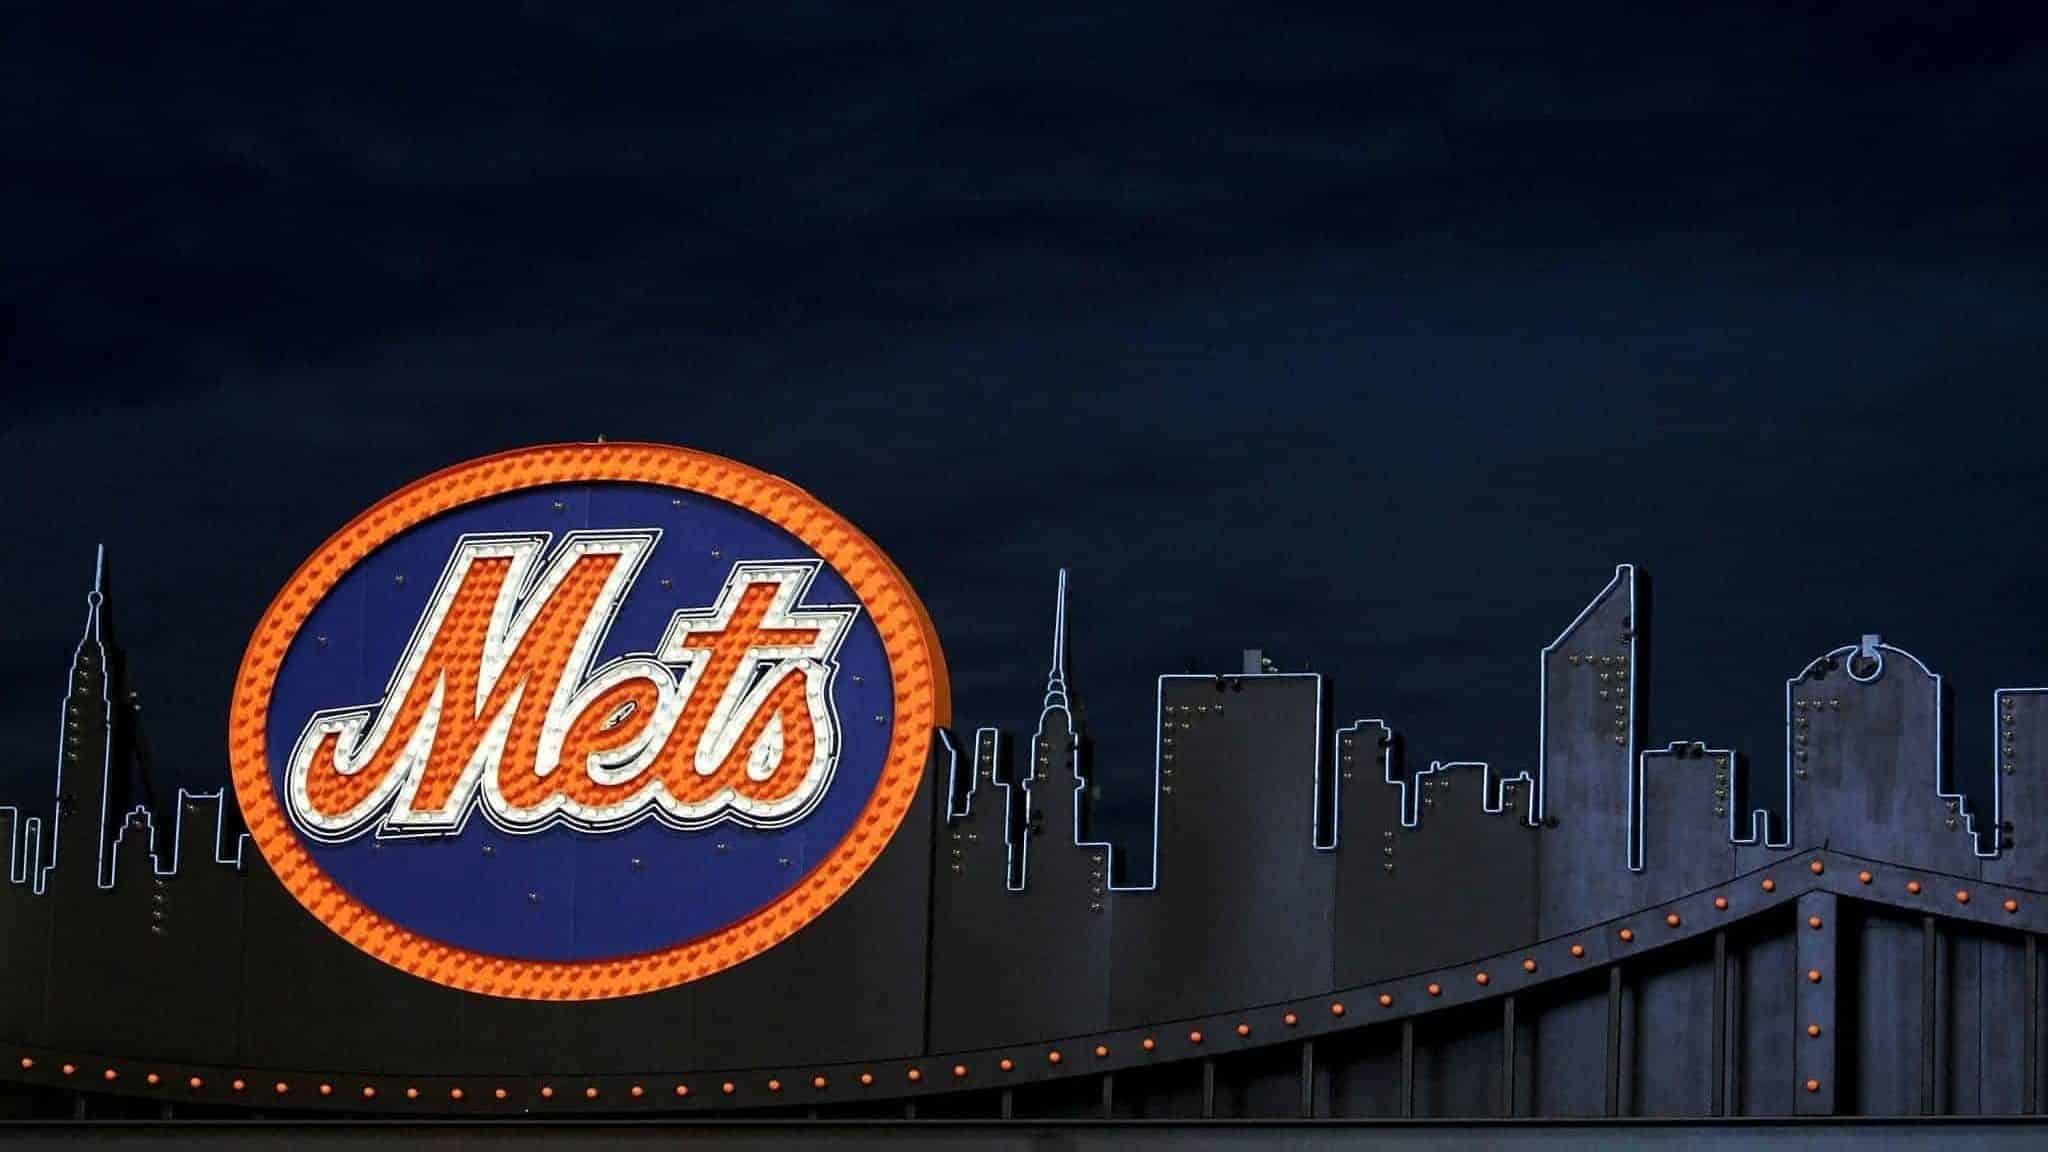 2048x1152 New York Mets news: Team has 2 positive COVID-19 tests, Thursday's game canceled